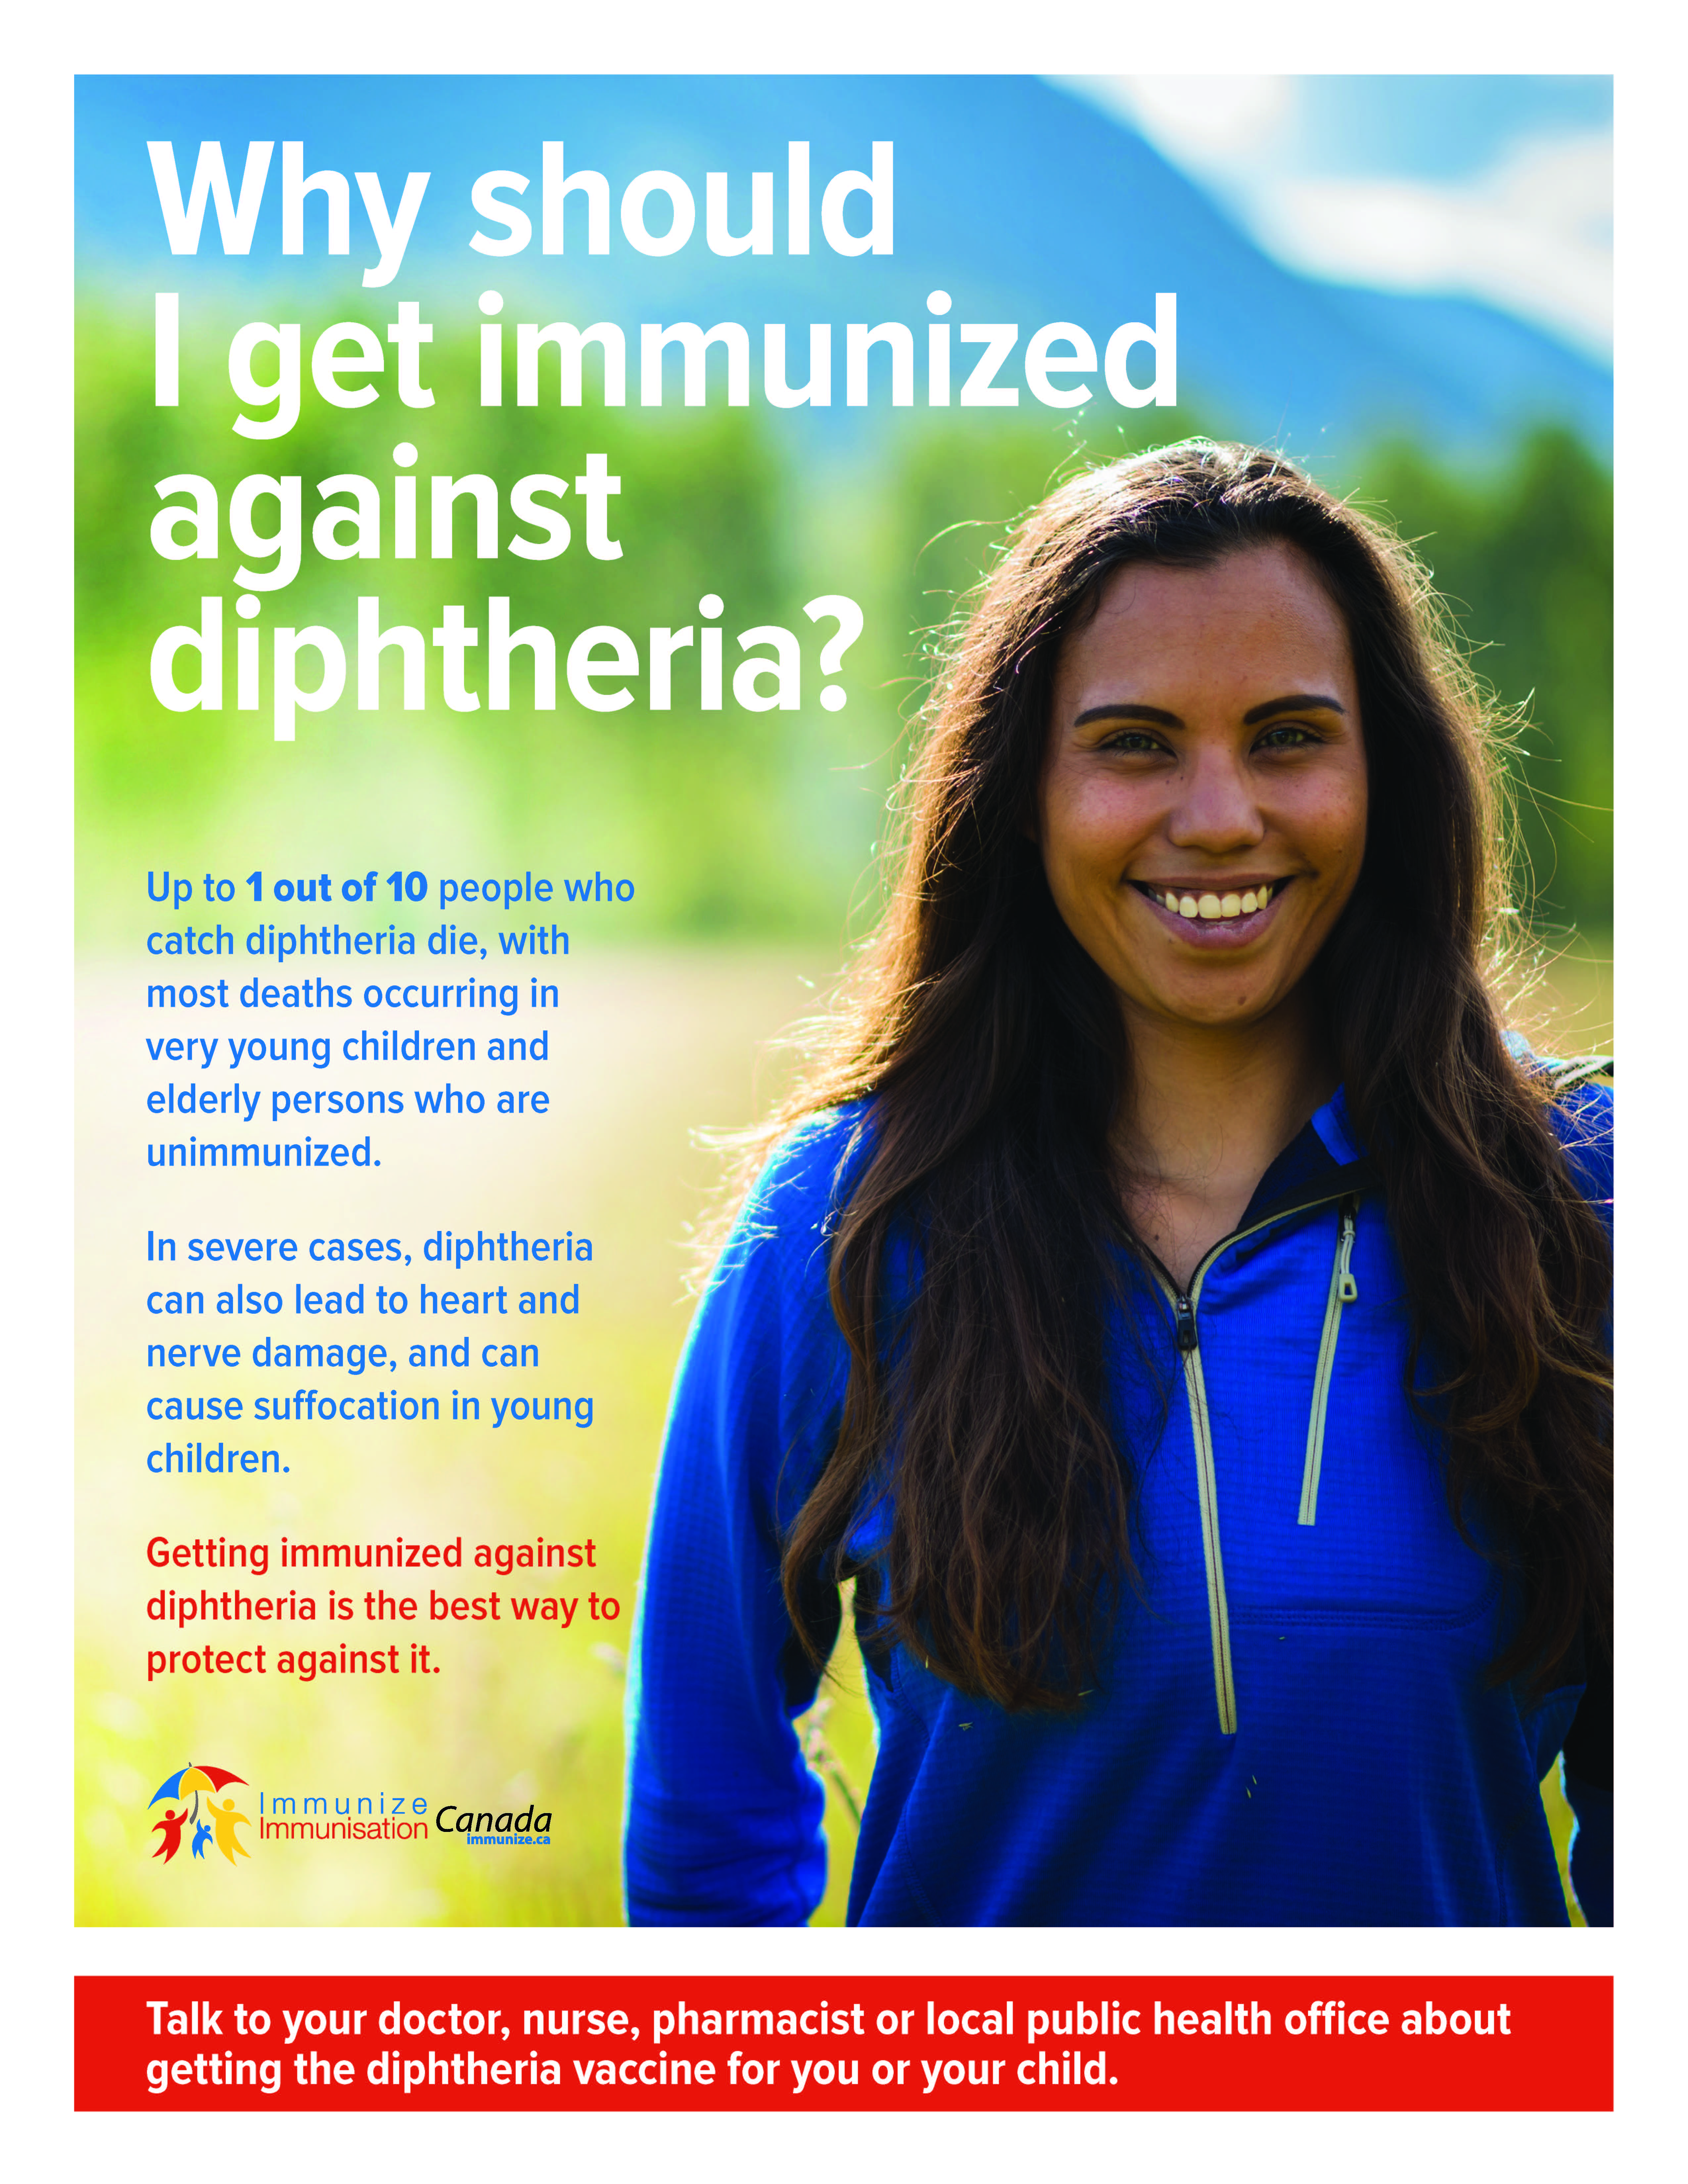 Why should I get immunized against diphtheria?